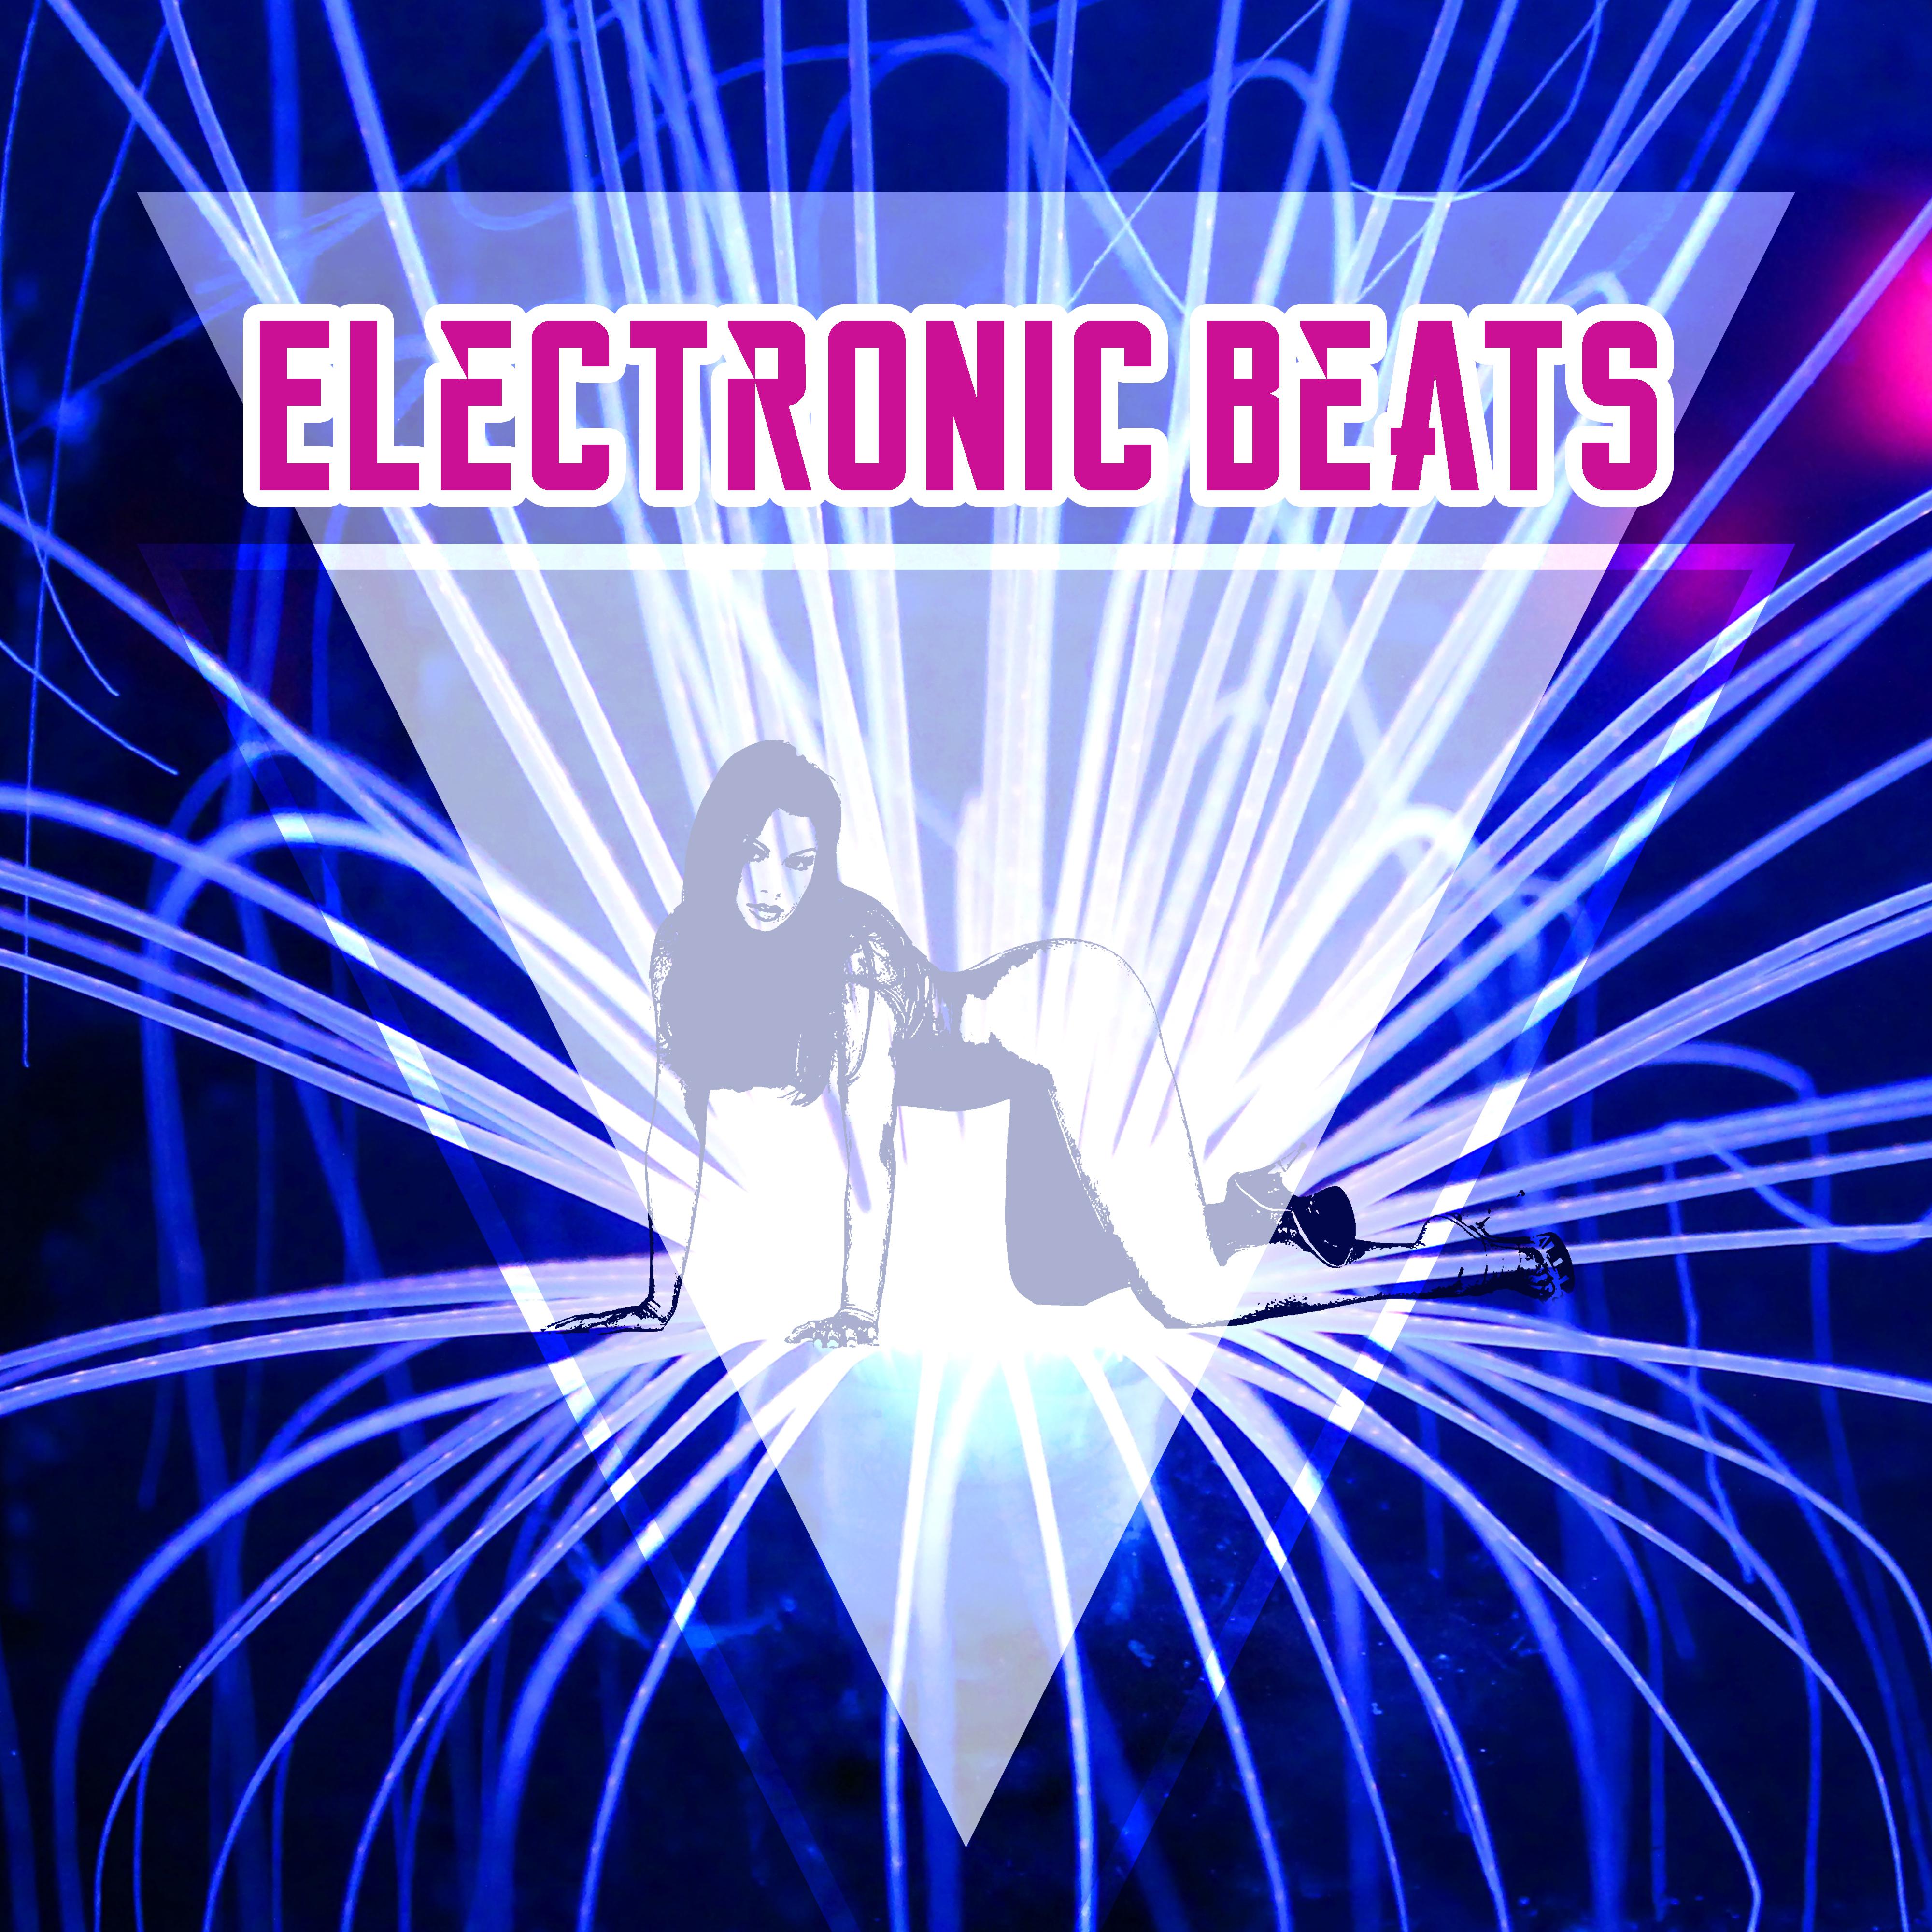 Electronic Beats – Chill Out Music, Dummer Lounge, Dance, Party, Hits